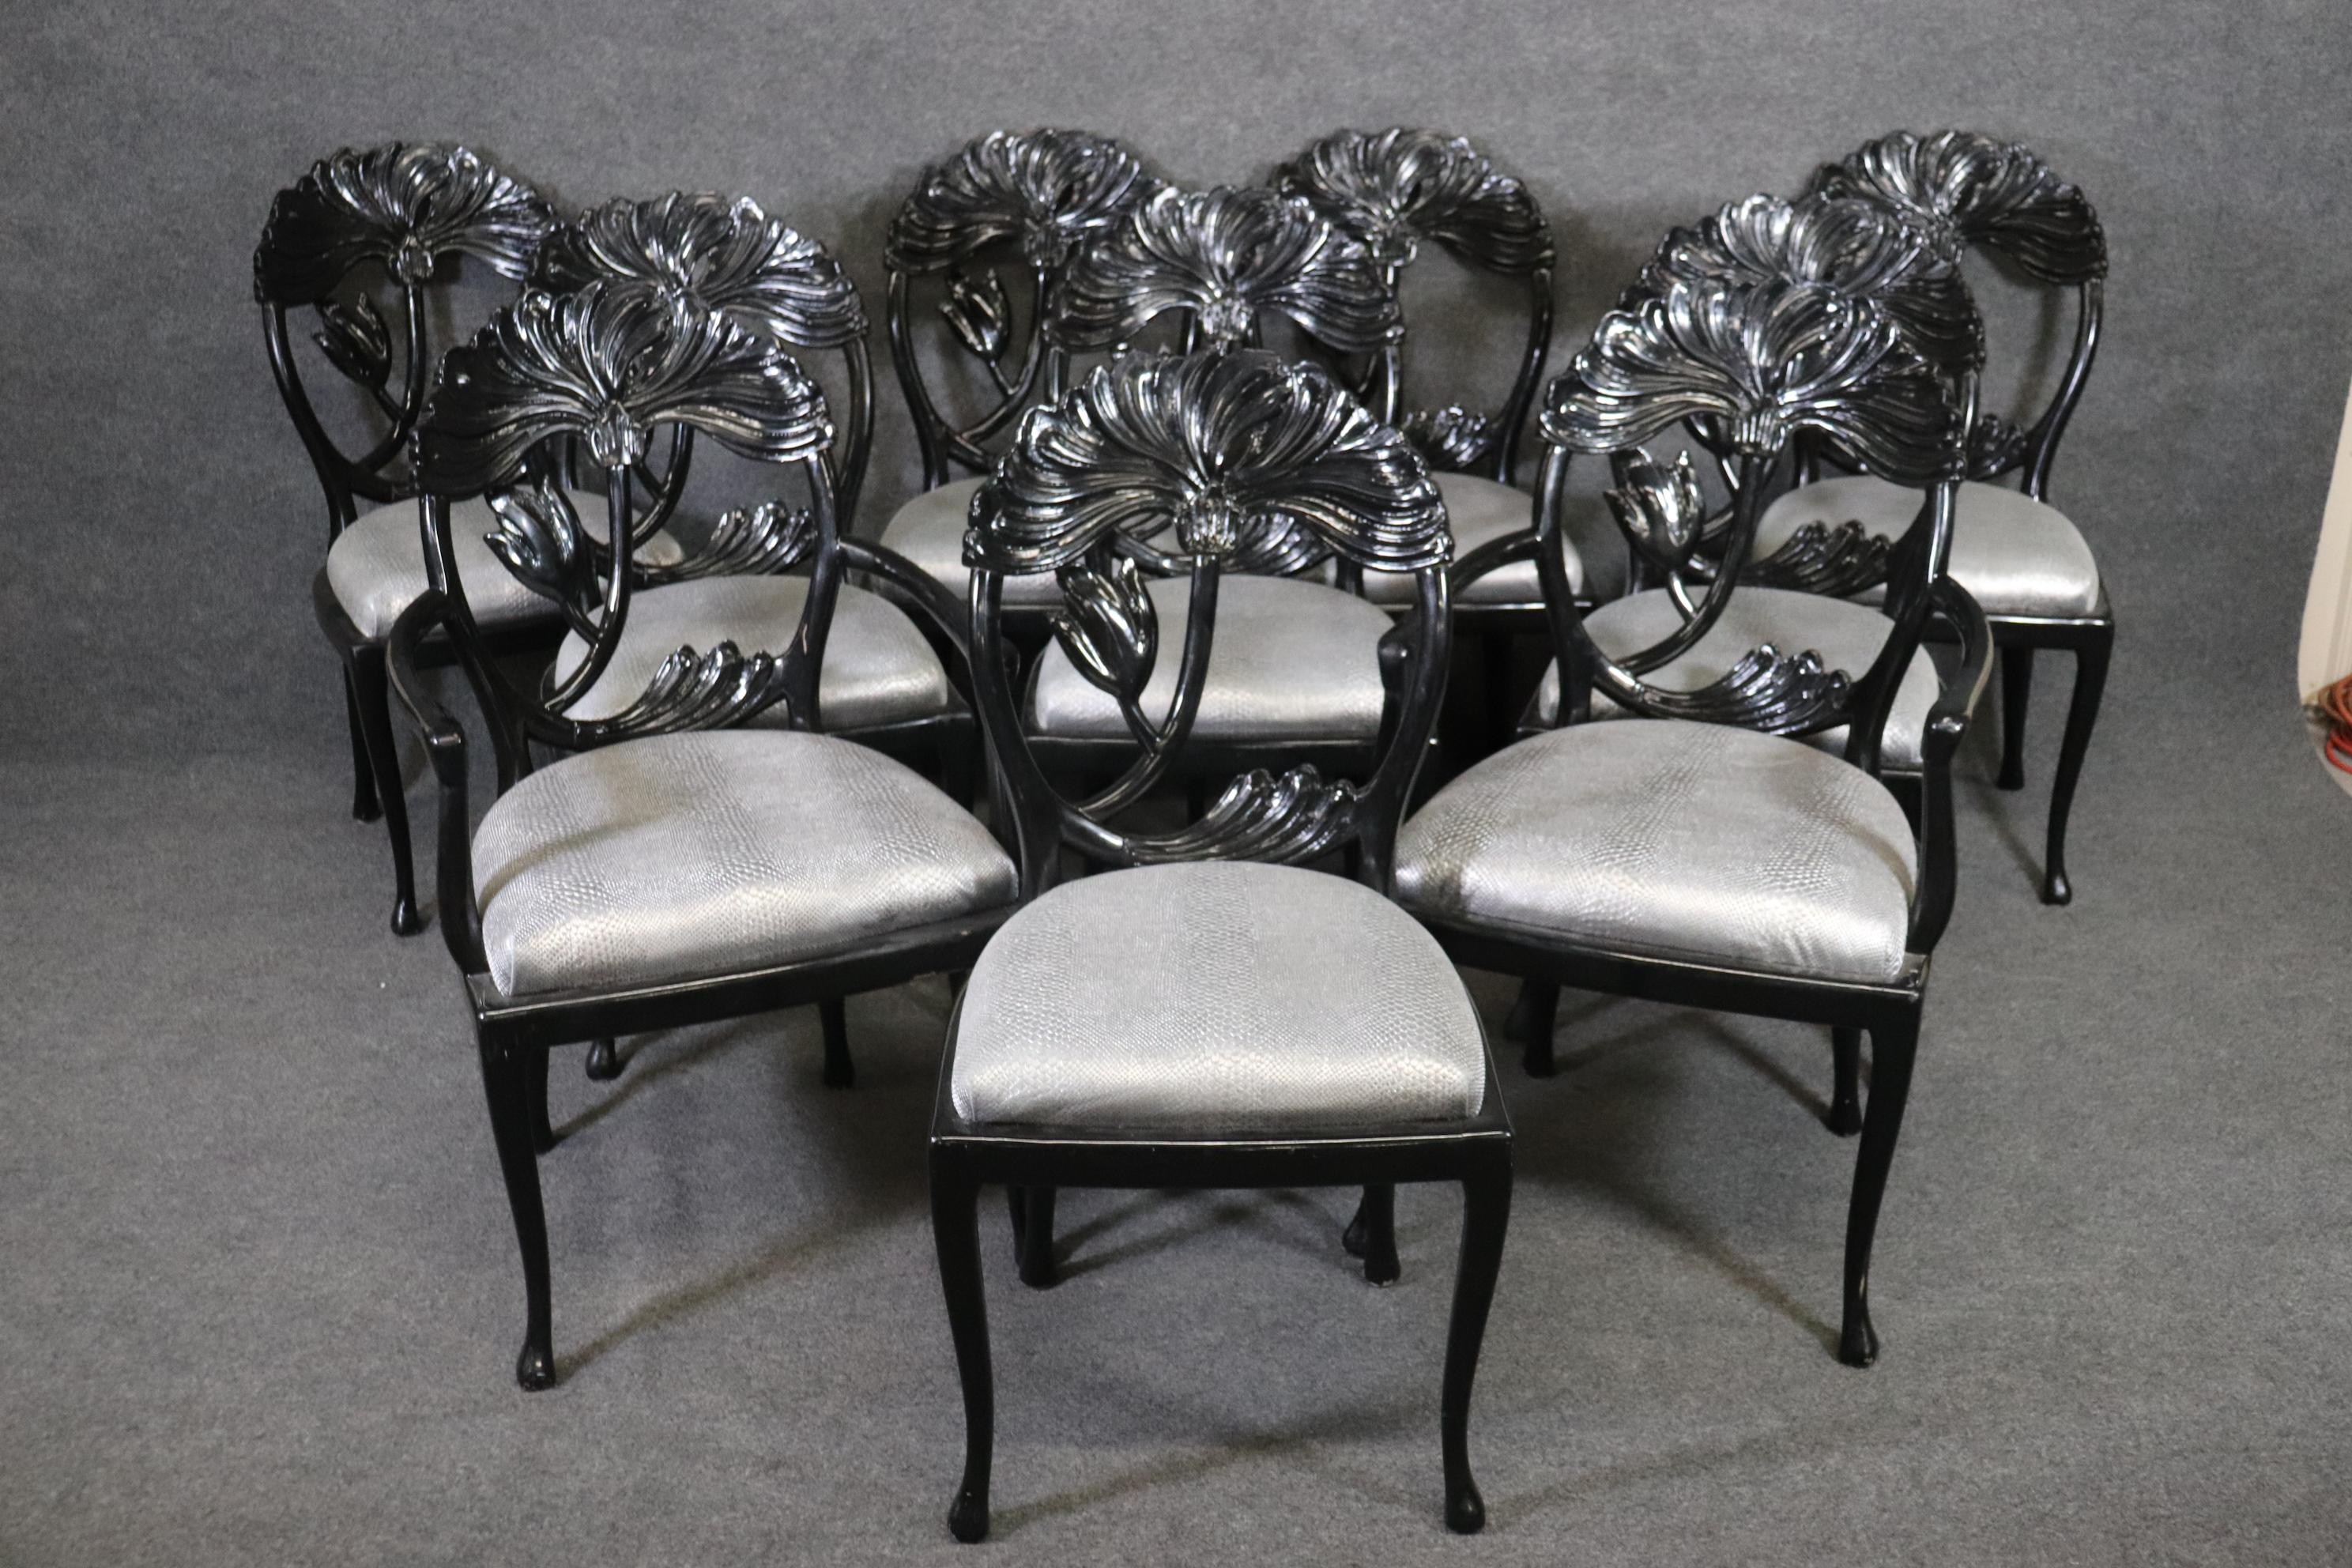 Late 20th Century 10 Black Lacquered Mid-Century Modern Regency Style Dining Chairs, circa 1980